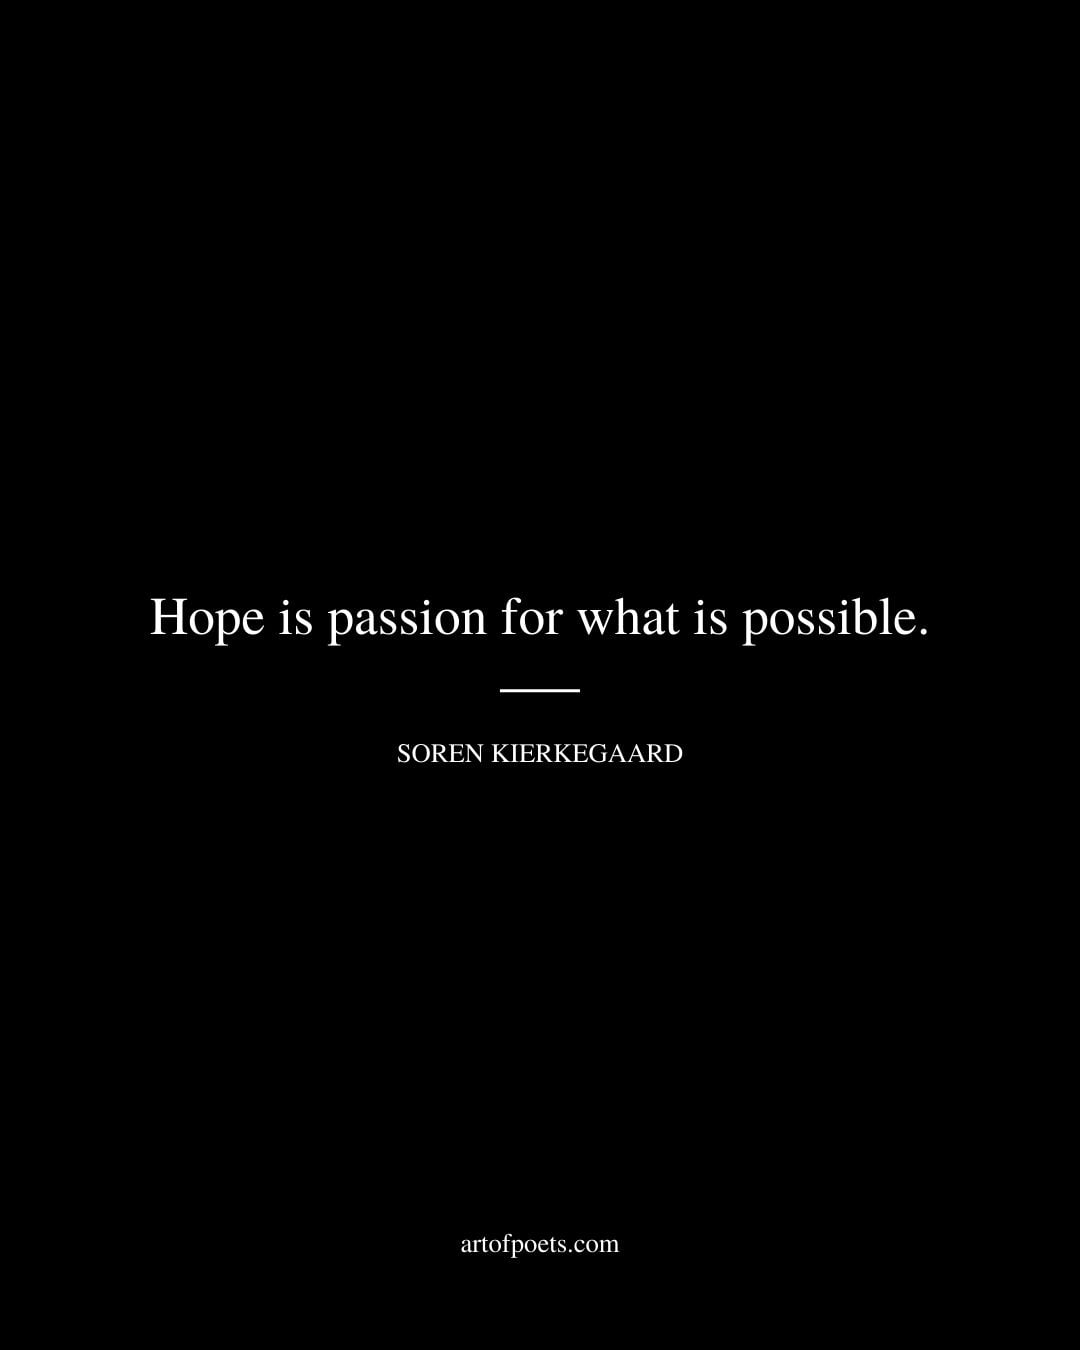 Hope is passion for what is possible. Soren Kierkegaard